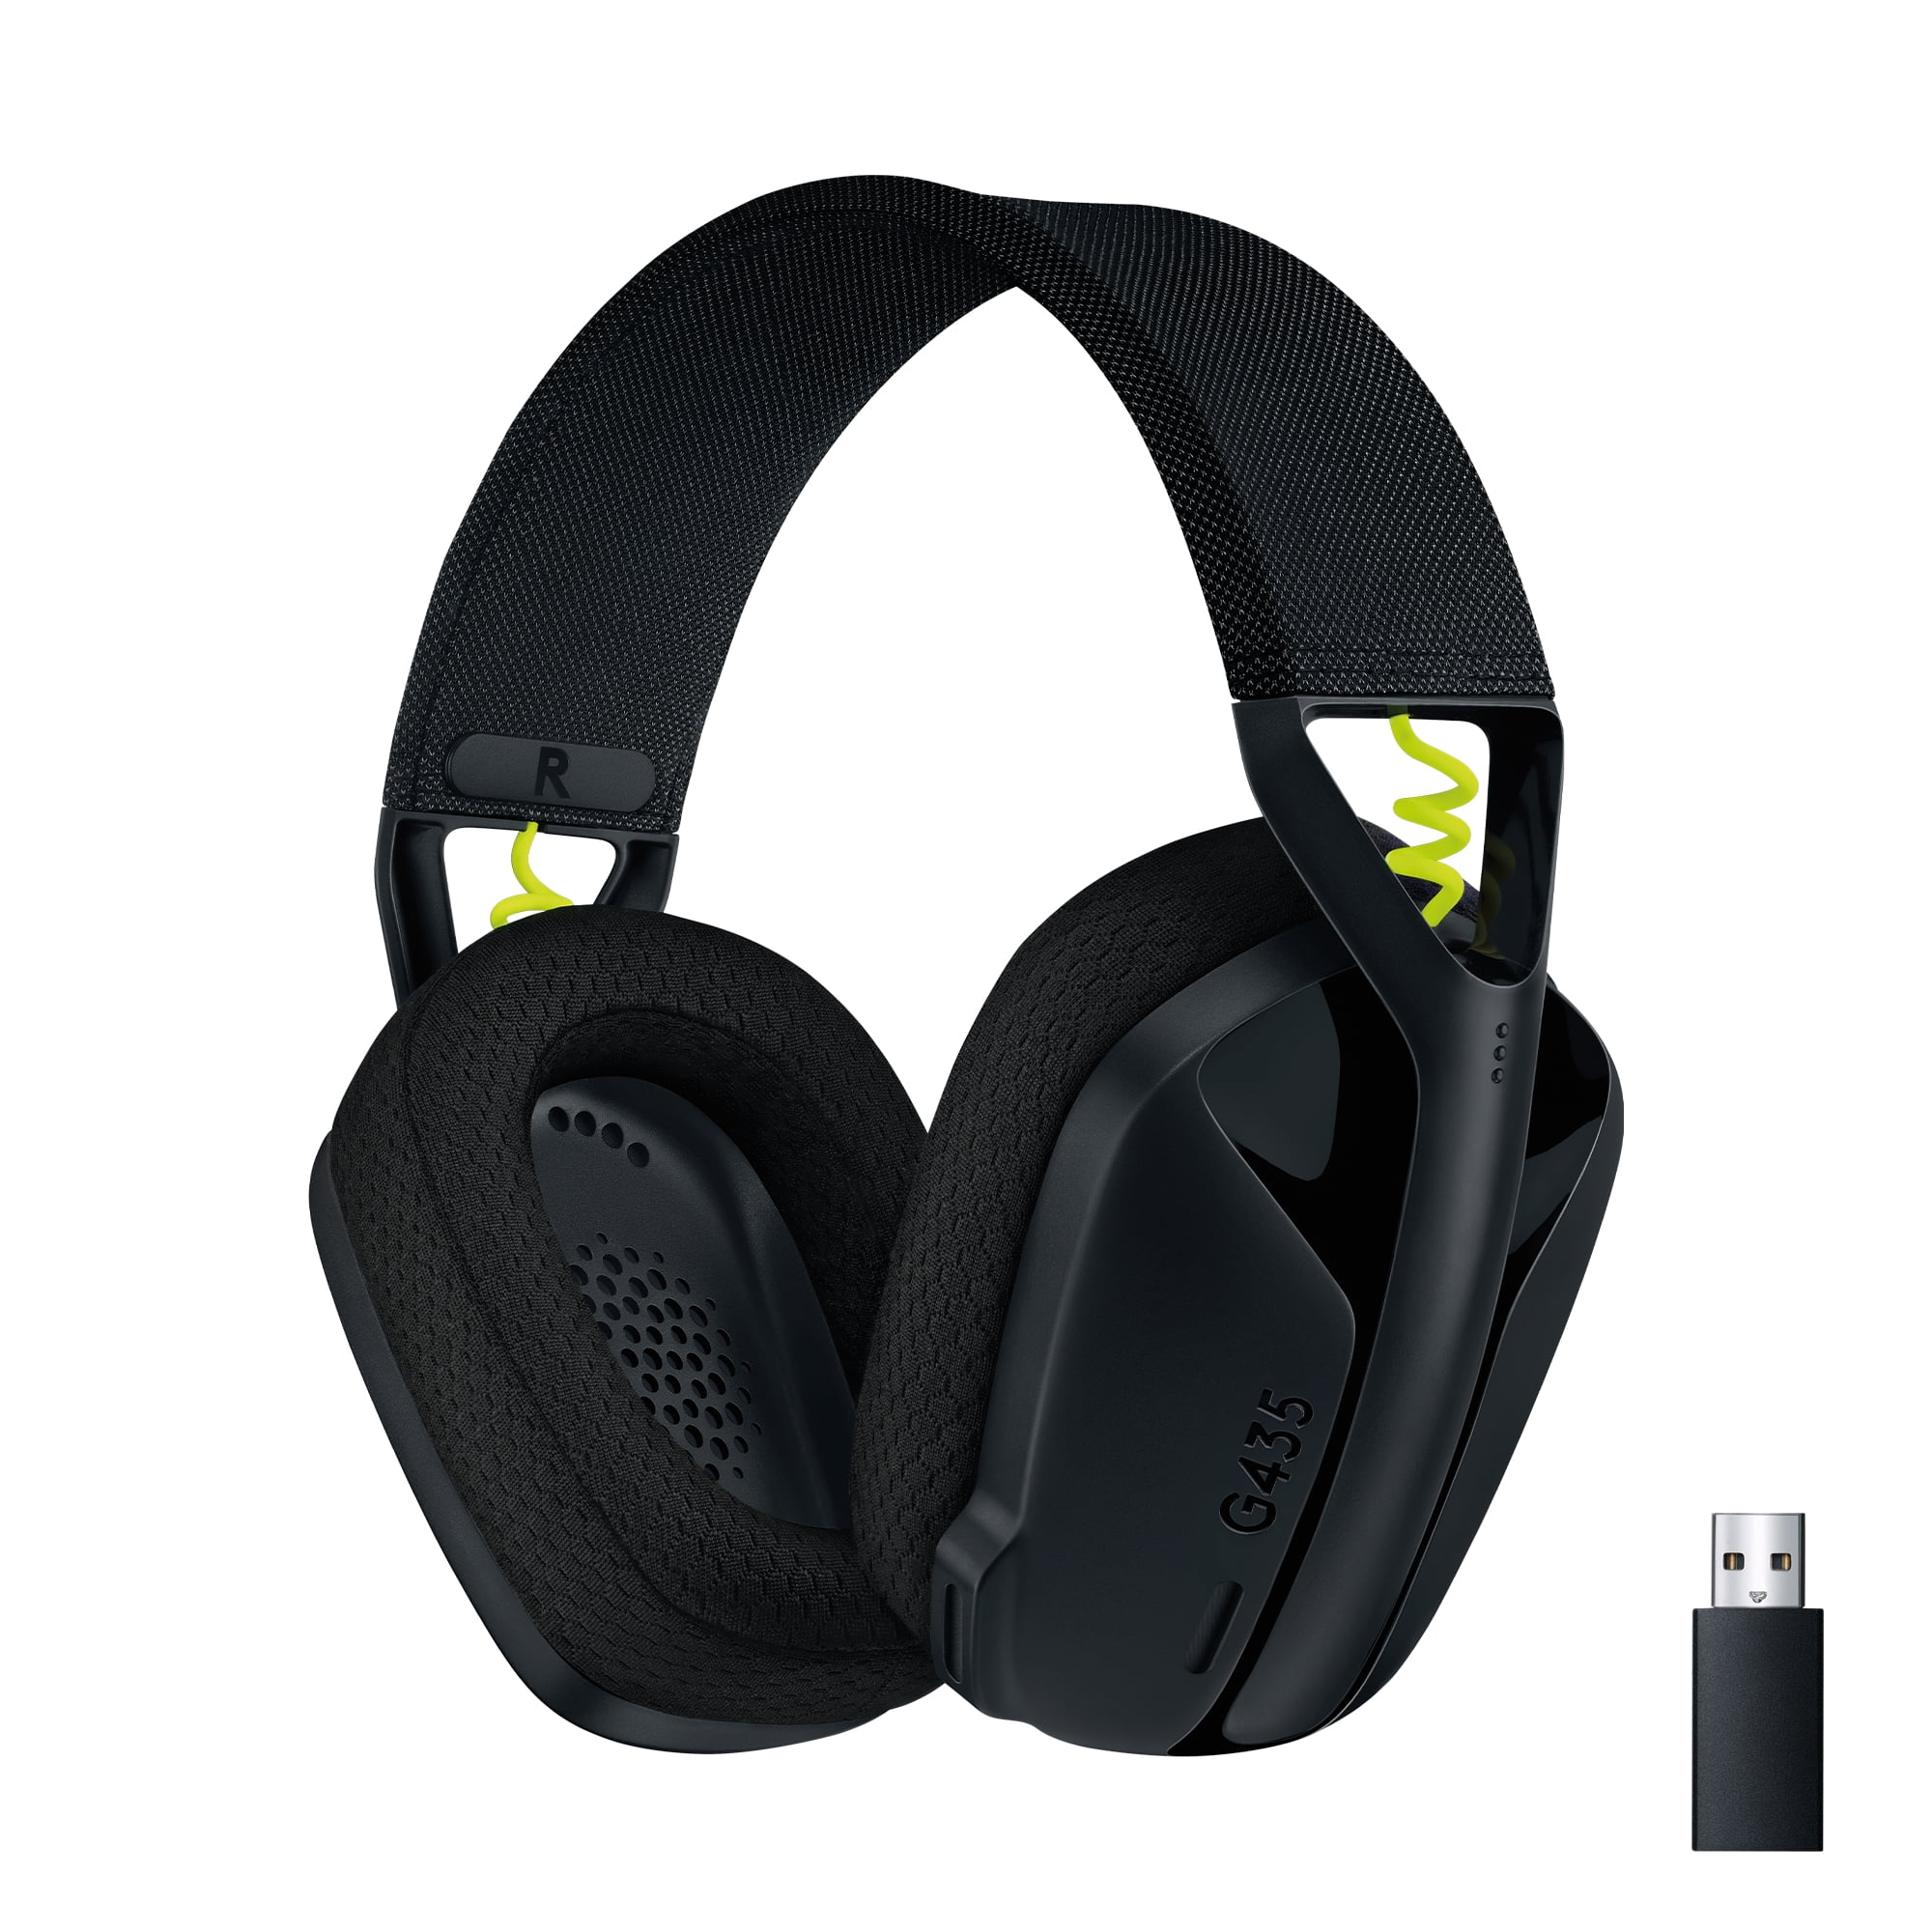 dejligt at møde dig nok retning Logitech G435 LIGHTSPEED and Bluetooth Wireless Gaming Headset -  Lightweight over-ear headphones, built-in mics, 18h battery, compatible  with Dolby Atmos, PC, PS4, PS5, Mobile, Black - Walmart.com